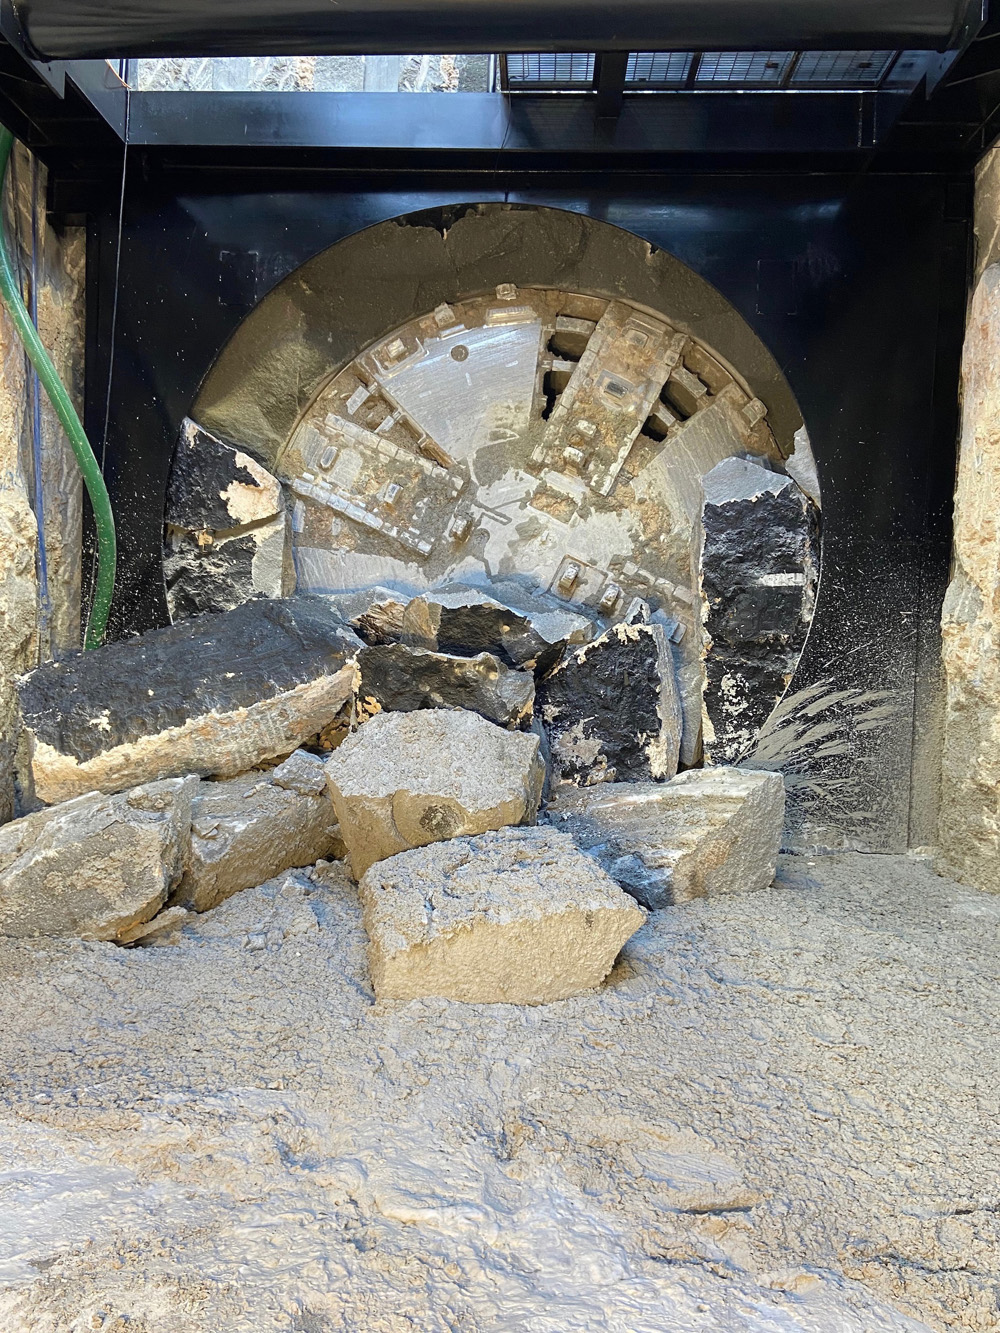 Breakthrough at the end of The Boring Company’s first tunnel for the LV Convention Center Loop people mover project in February (The Boring Company)